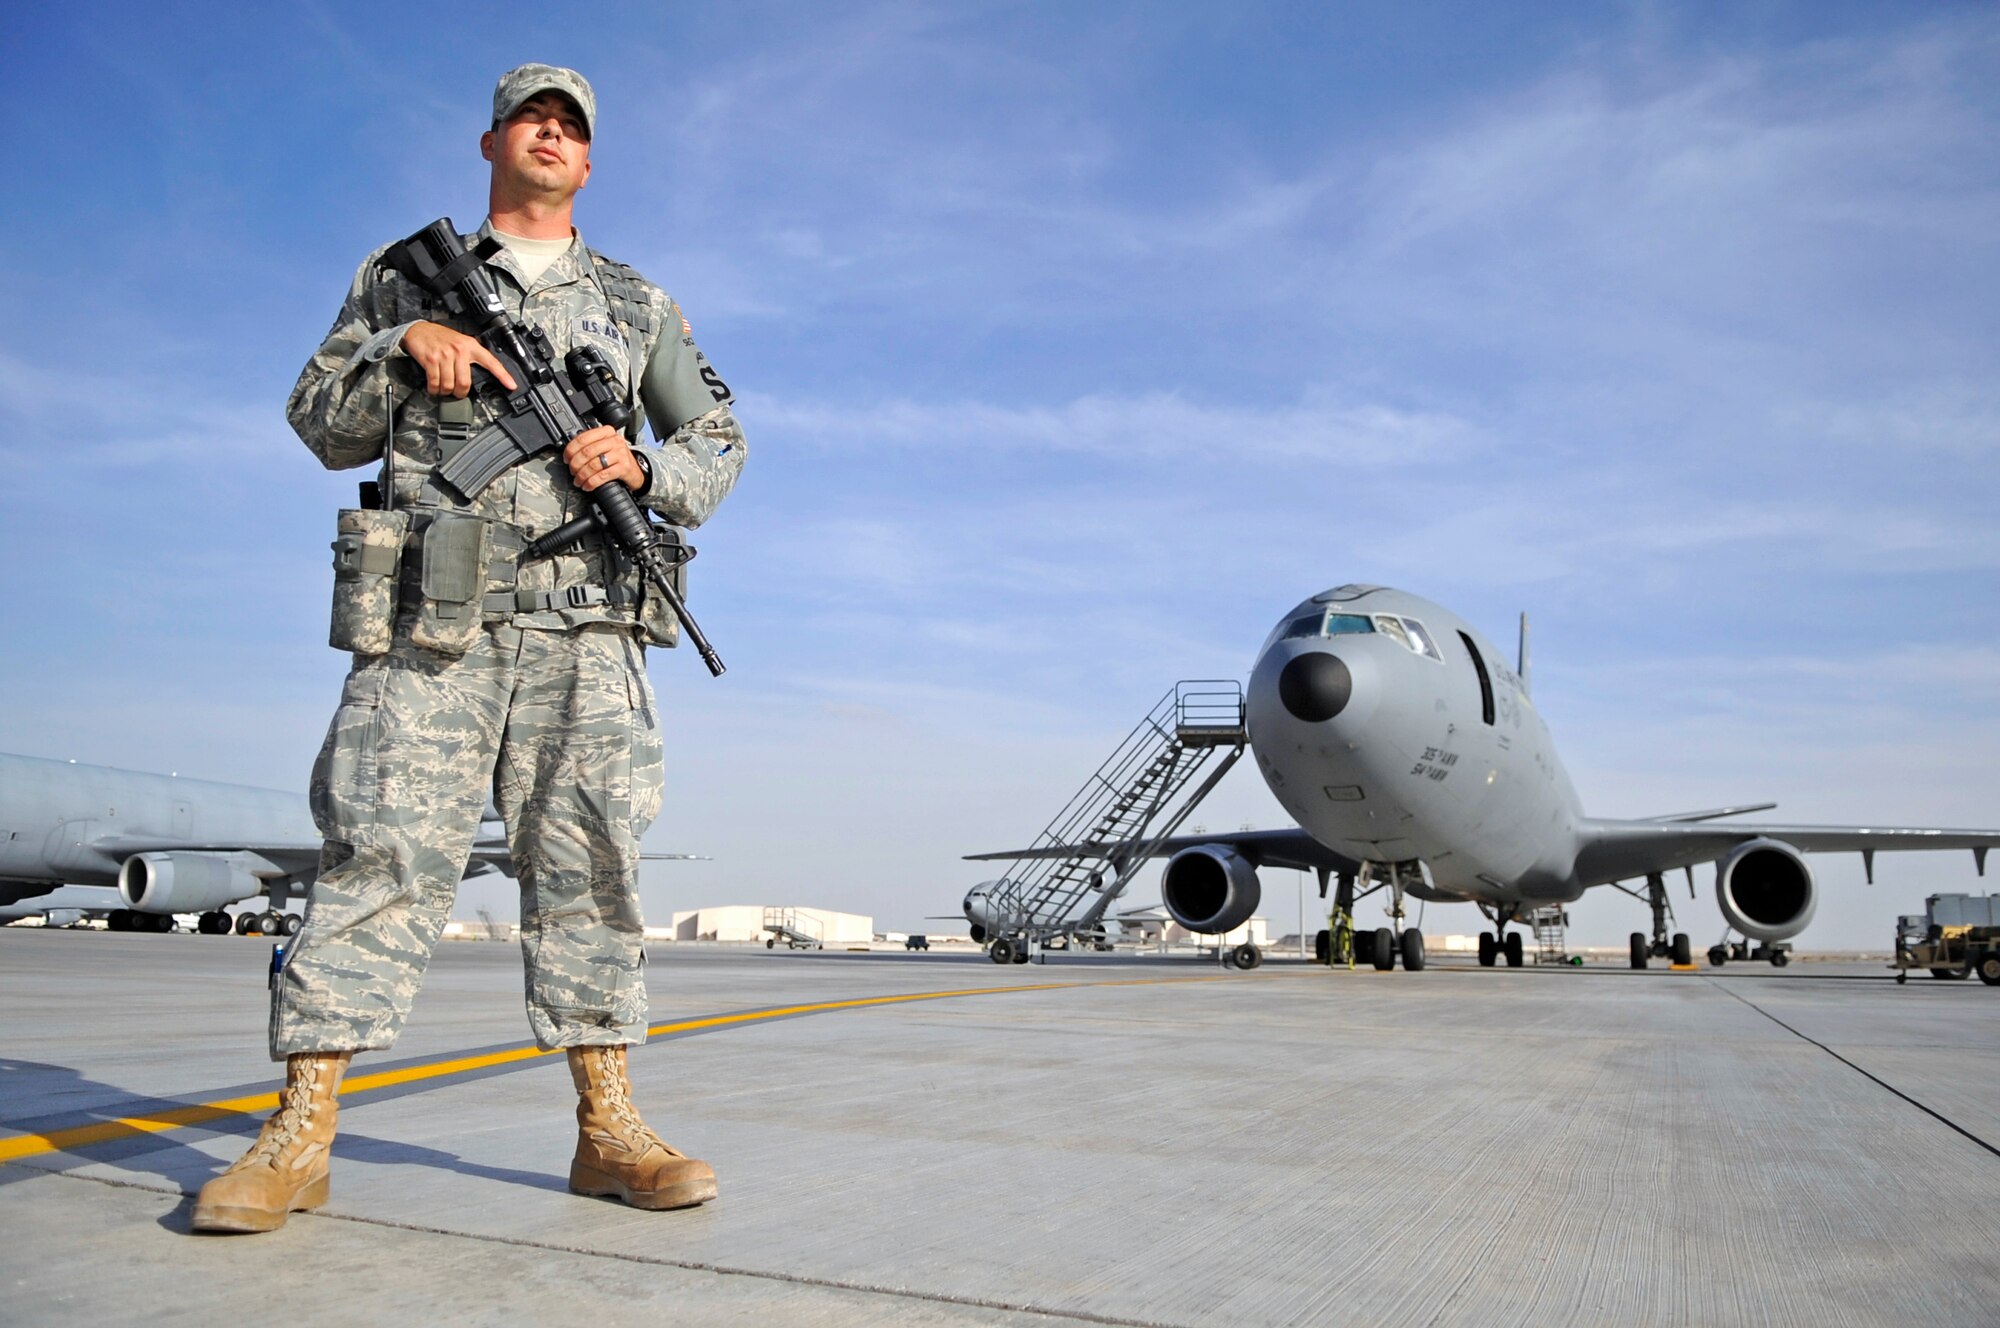 SOUTHWEST ASIA – Airman 1st Class Timothy Murphy, 380th Expeditionary Security Forces Squadron, stands guard on the flight line in front of a KC-10 Extender Nov. 21, 2009. Airman Murphy is deployed from Luke Air Force Base, Ariz., and grew up in Charleston, W.Va. (U.S. Air Force photo/Senior Airman Stephen Linch)